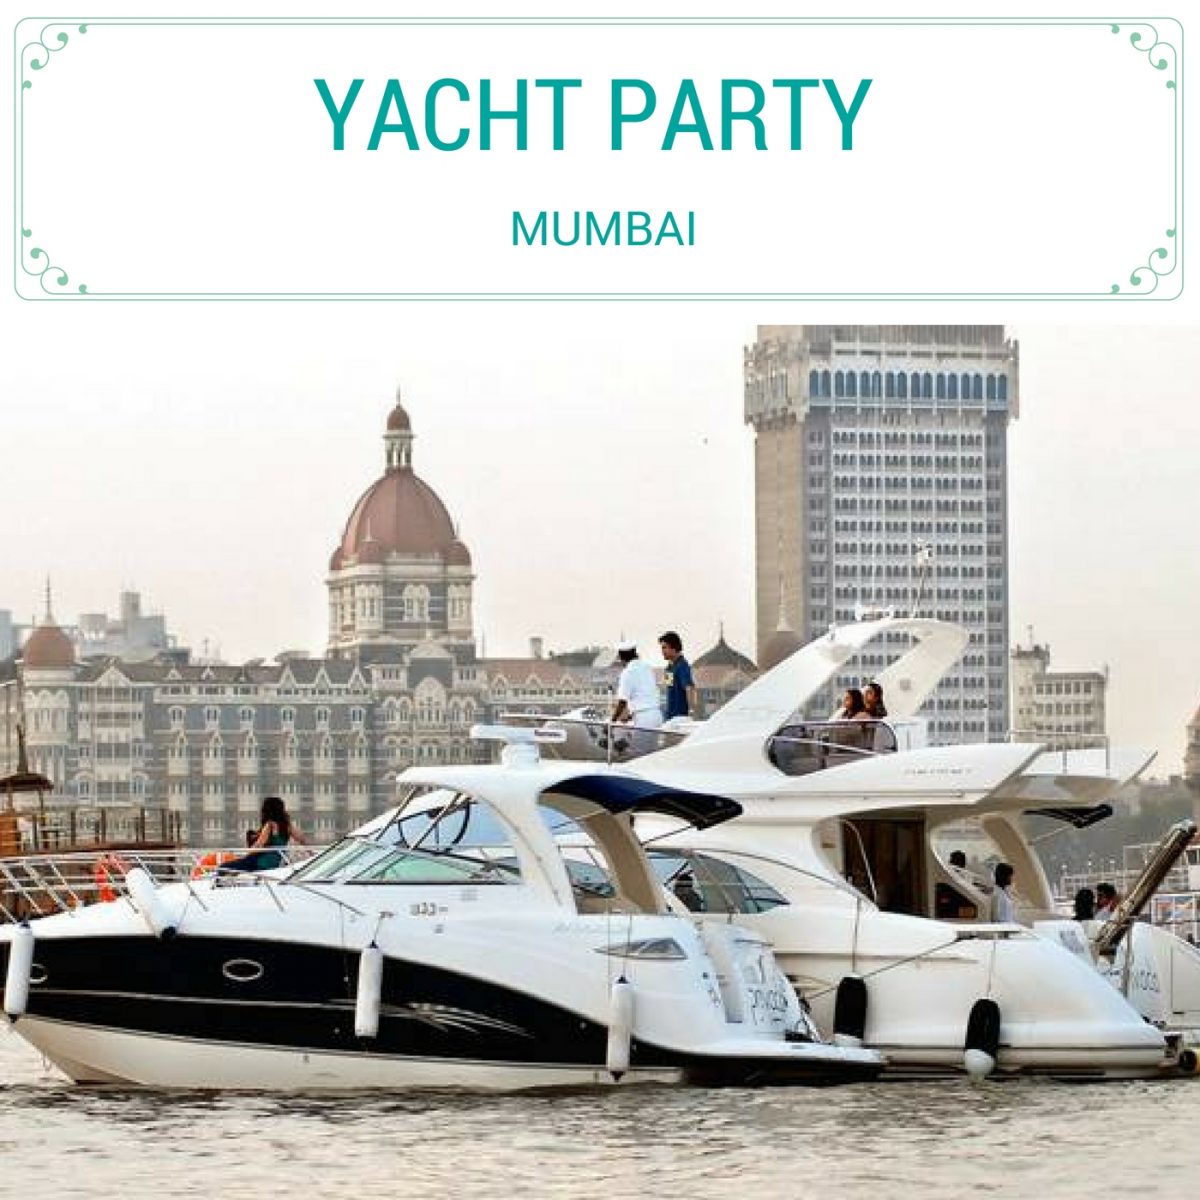 Add to Your Bucket List Yacht Party in Mumbai